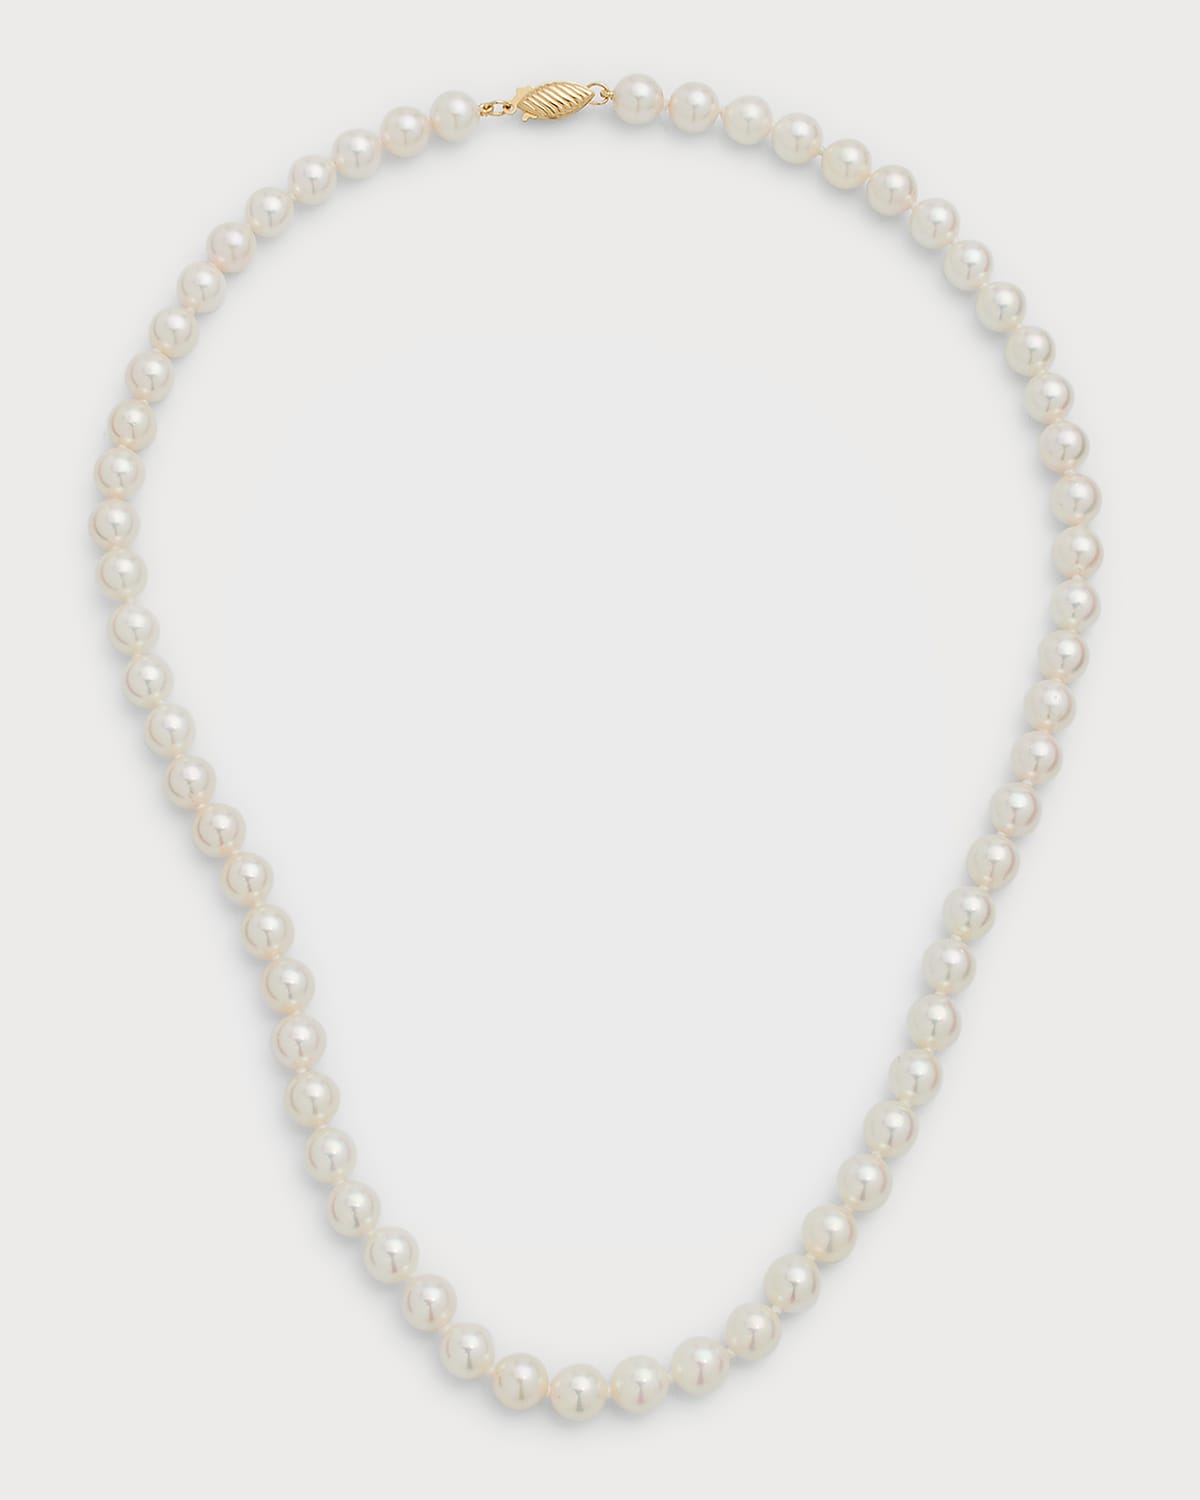 Belpearl 14k Yellow Gold Akoya Pearl Necklace, 18"